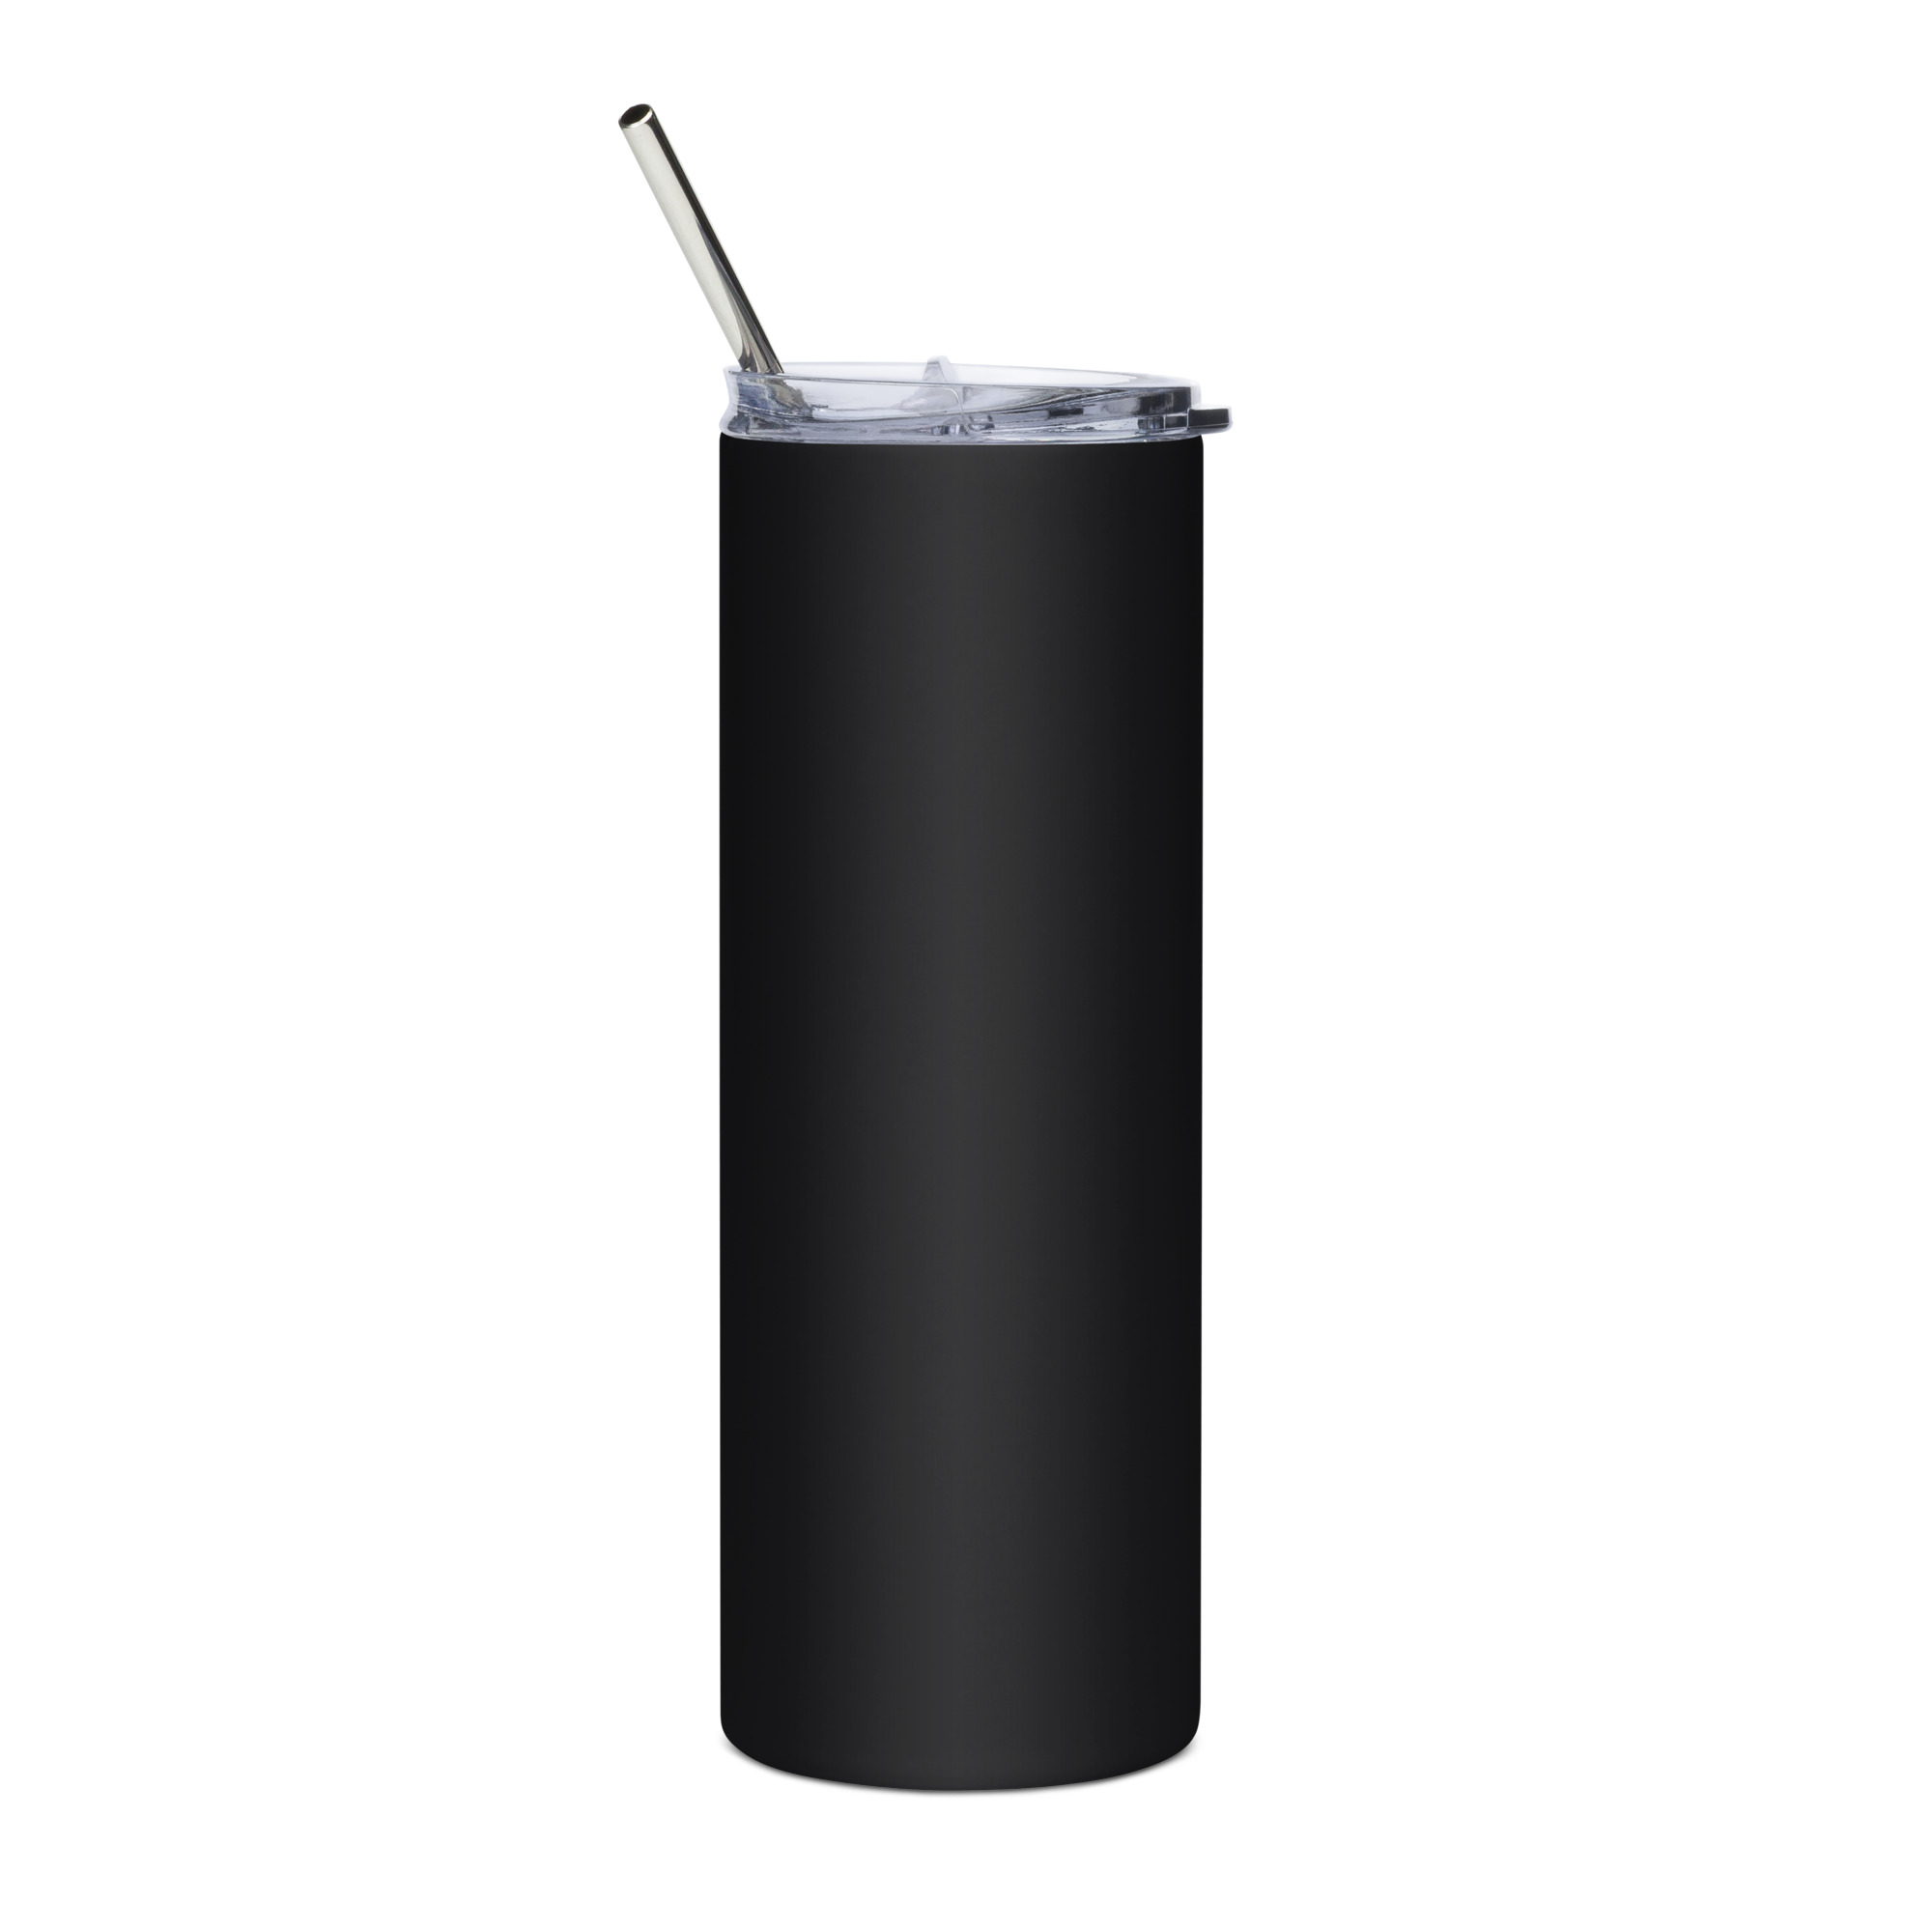 Stainless steel tumbler - 2GS (WORDS)